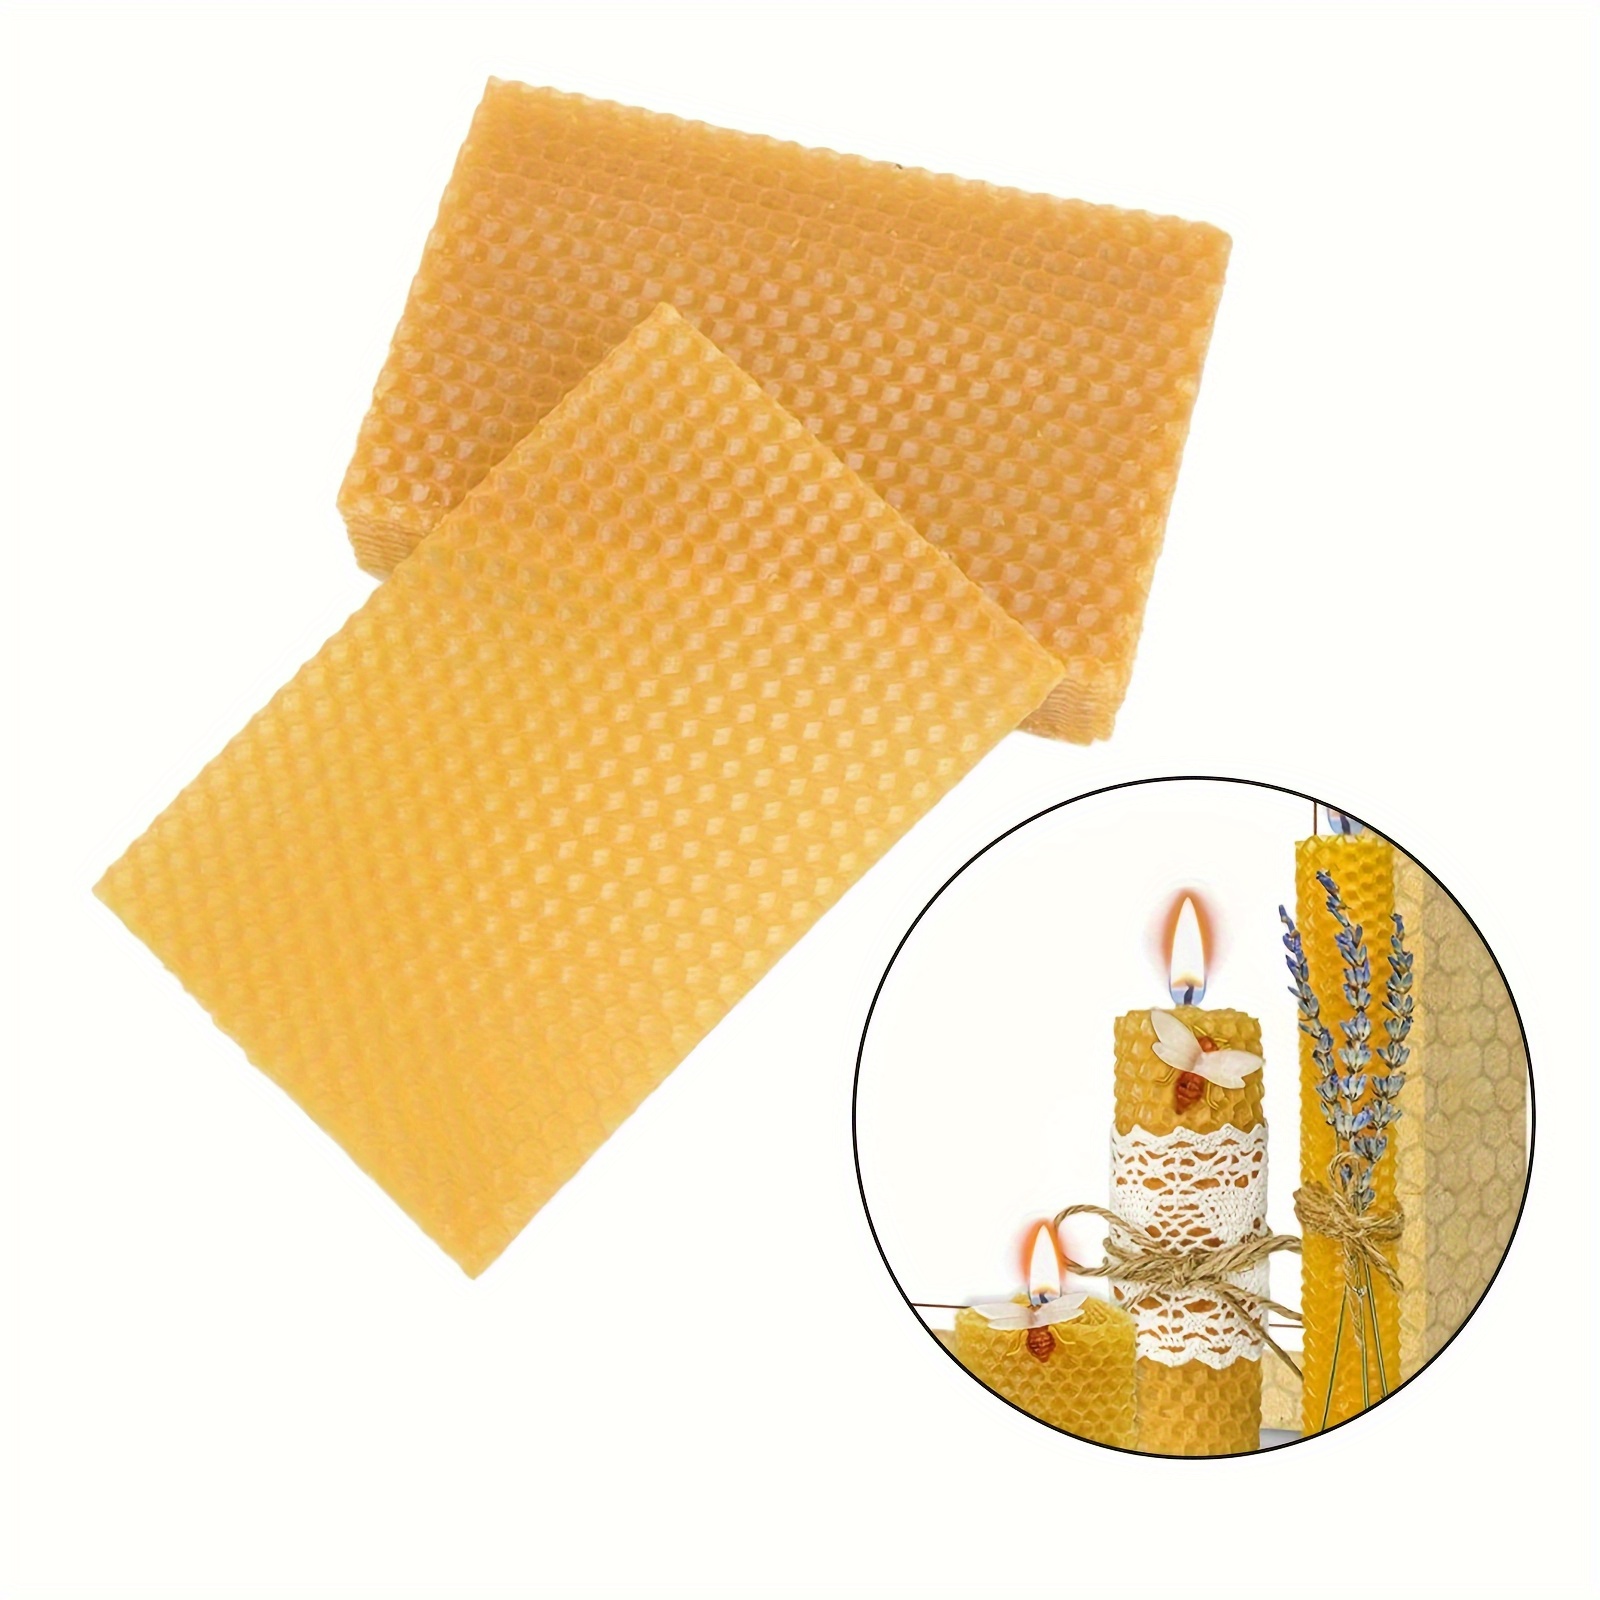 Beeswax candle making kit,12pcs Beeswax sheets for candle making